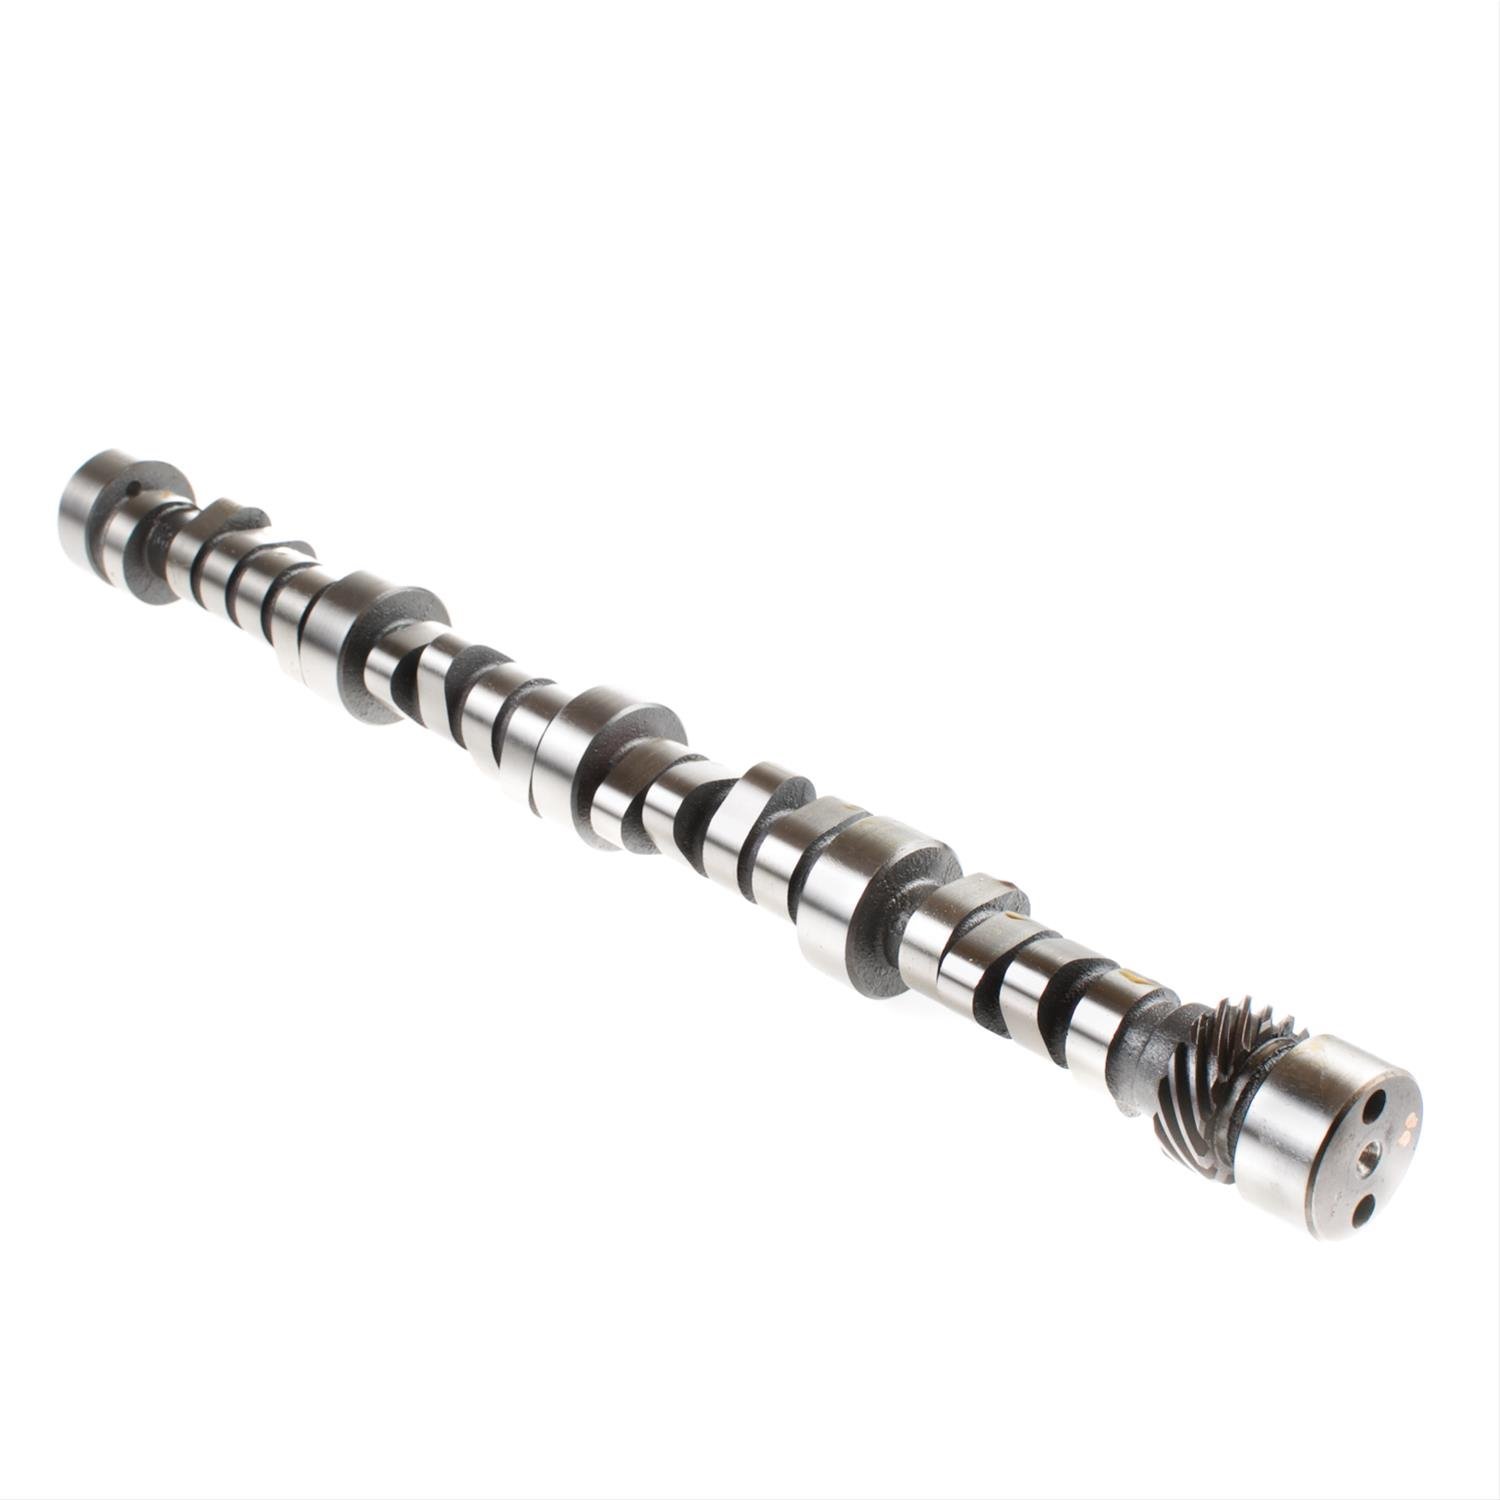 MC1336 Stock Replacement Camshaft